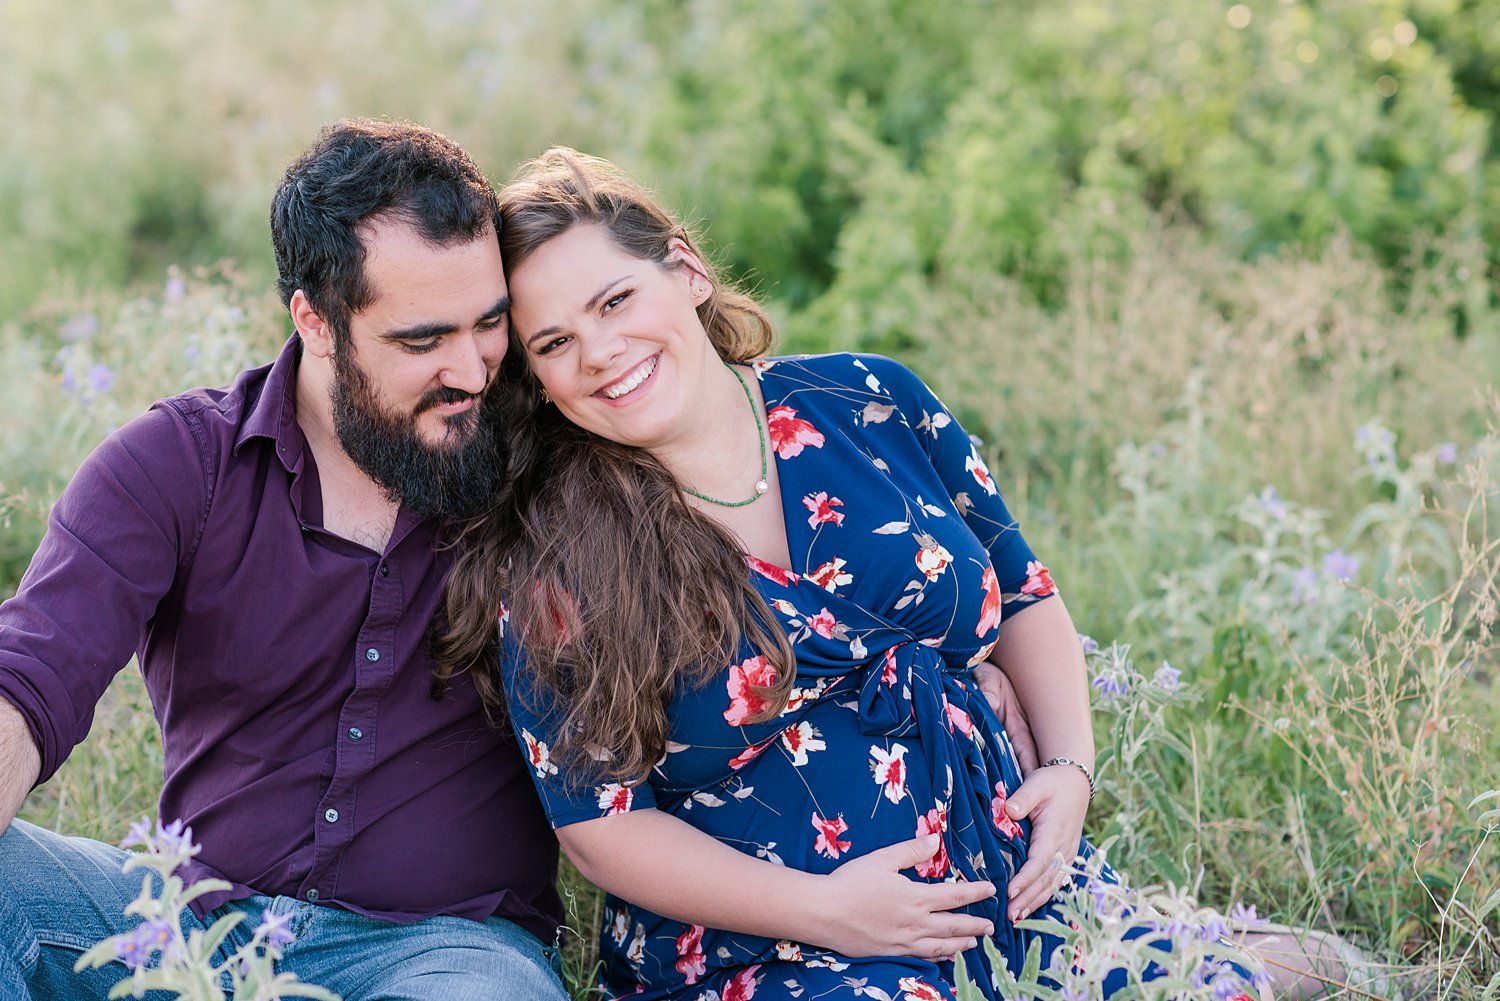 Dallas Portrait photographer, Maternity Portrait Photographer, Dallas Family Session, Maternity Photographer, Family Photographer, MaggShots Photography, North Texas Photographer, Old Town Lewisville, Texas photographer,